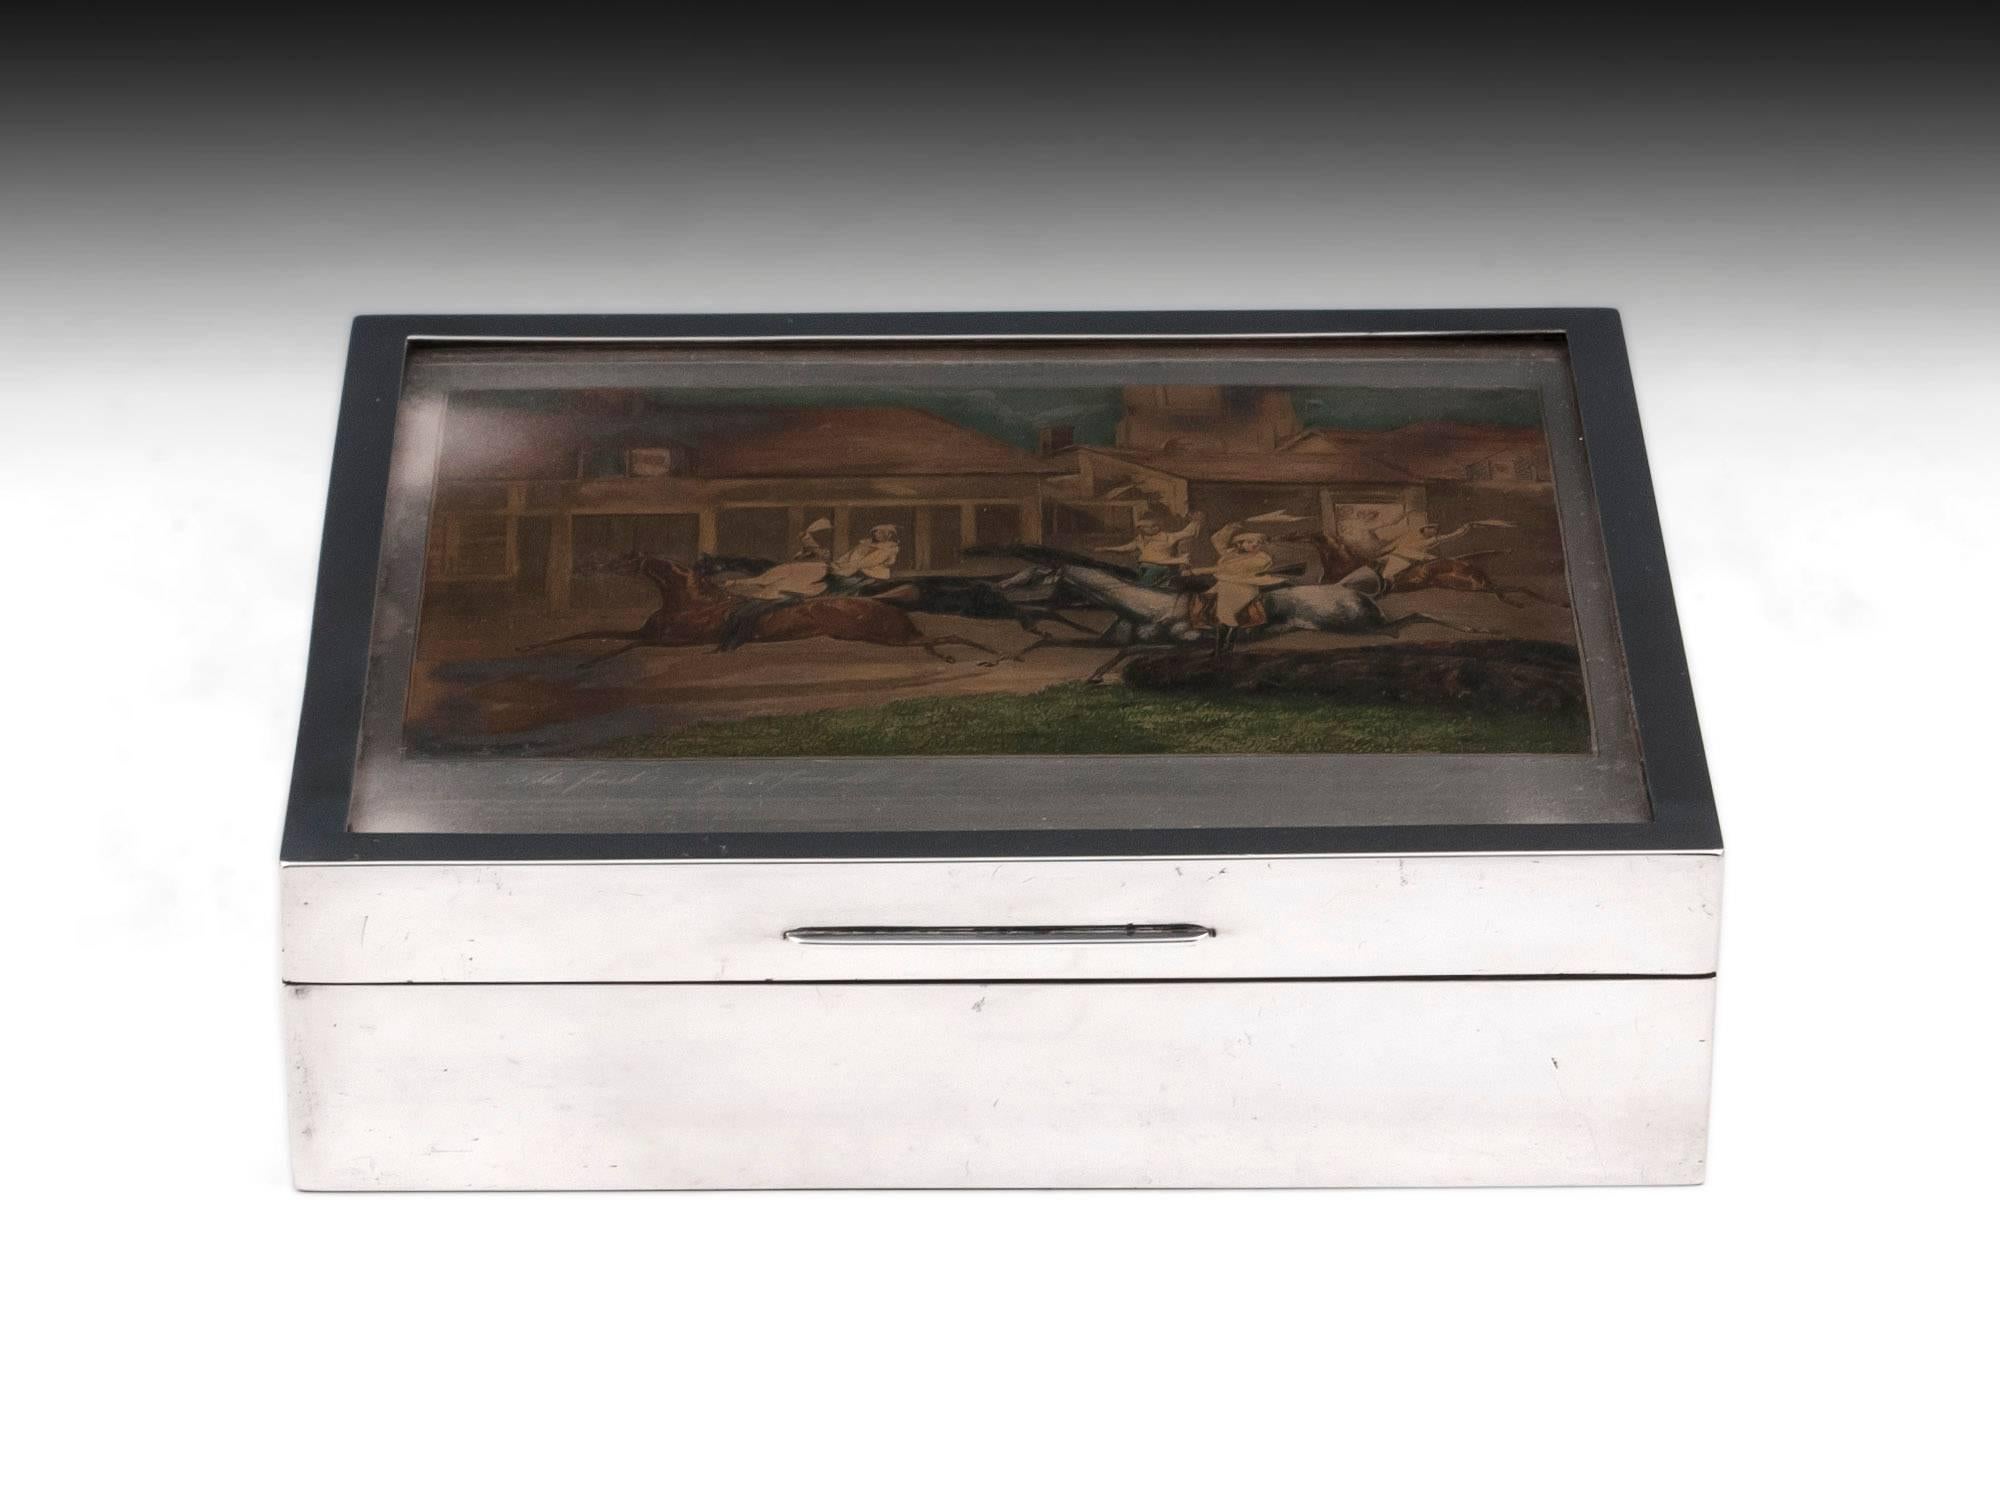 Silver cigar box featuring a horse racing themed sterling silver hand-coloured engraved printing plate under which is inscribed extensive text as follows: 
“The First Steeple-Chase on Record, Nacton Church & Village, Near Ipswich as first published